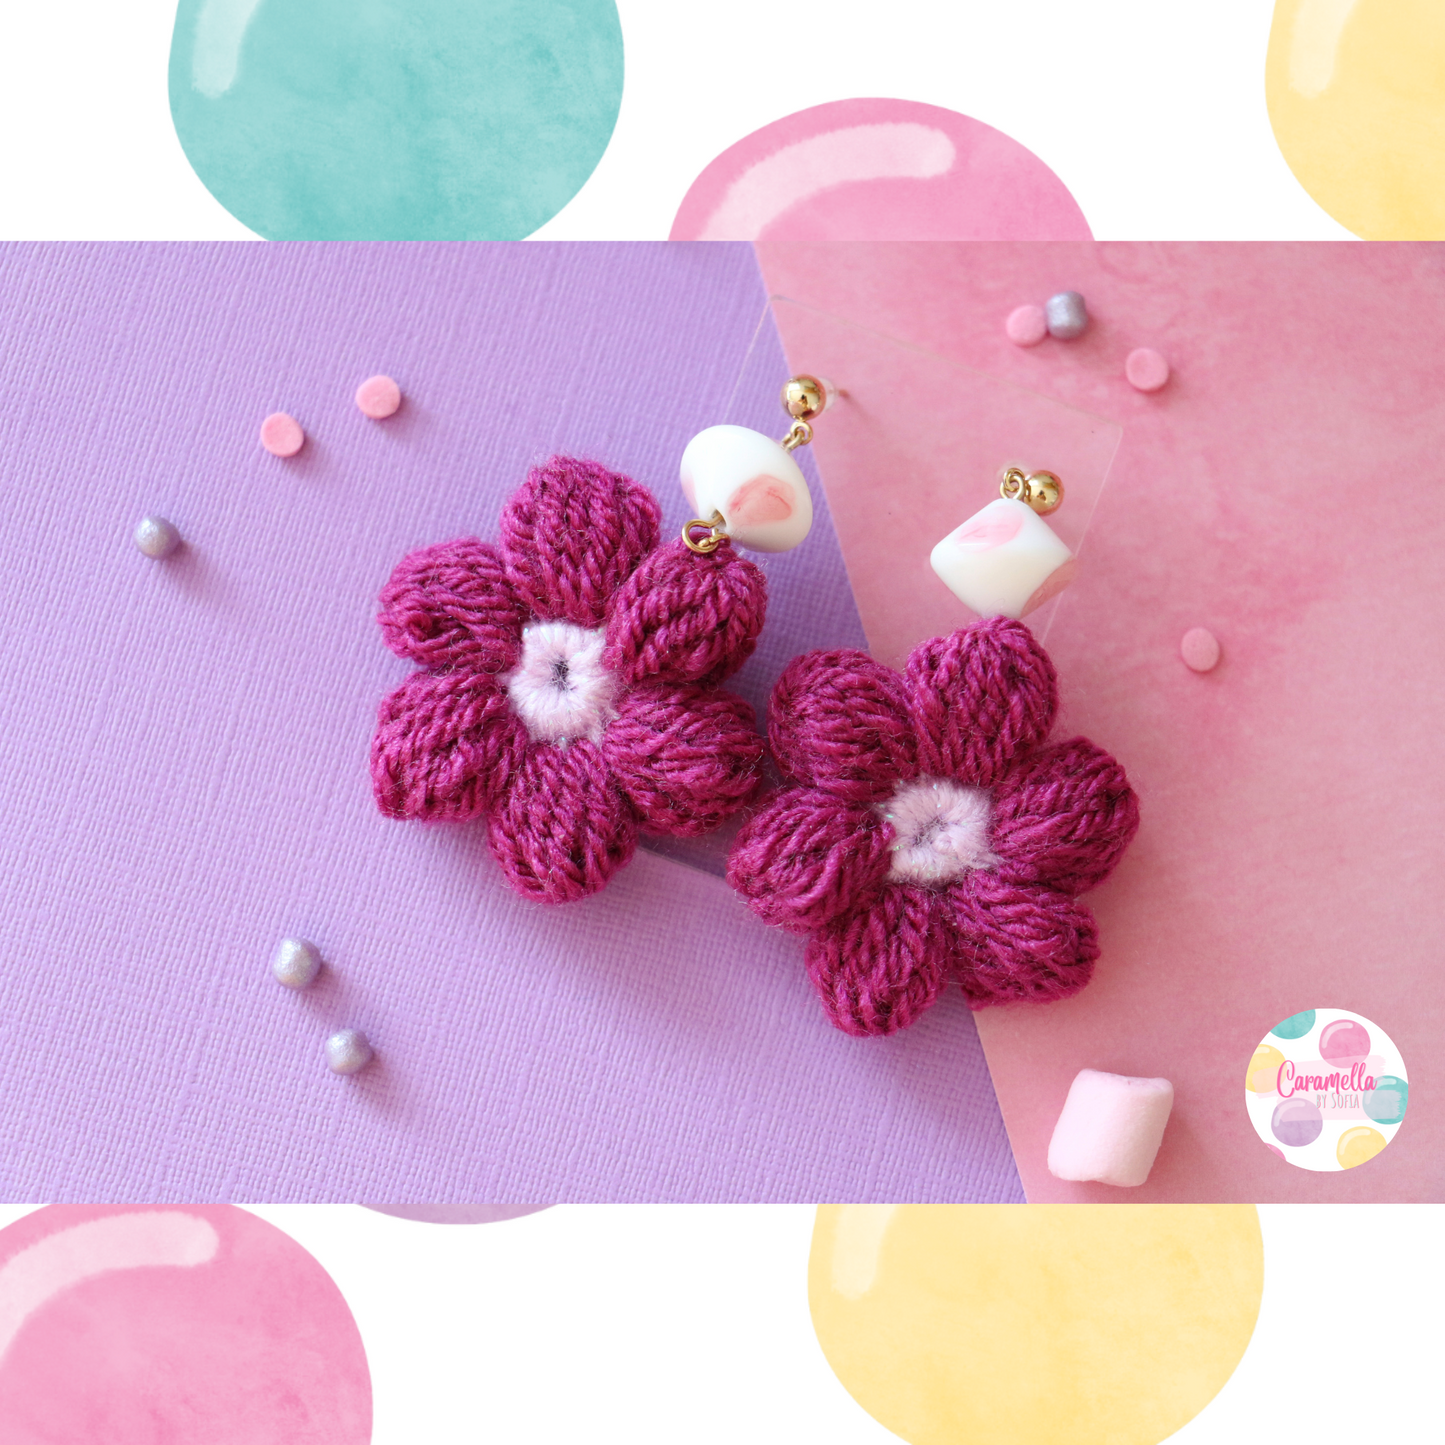 Handmade Crochet Flower Earrings - Lilac and Berry Purple - Chalk Beads - Gold Plated